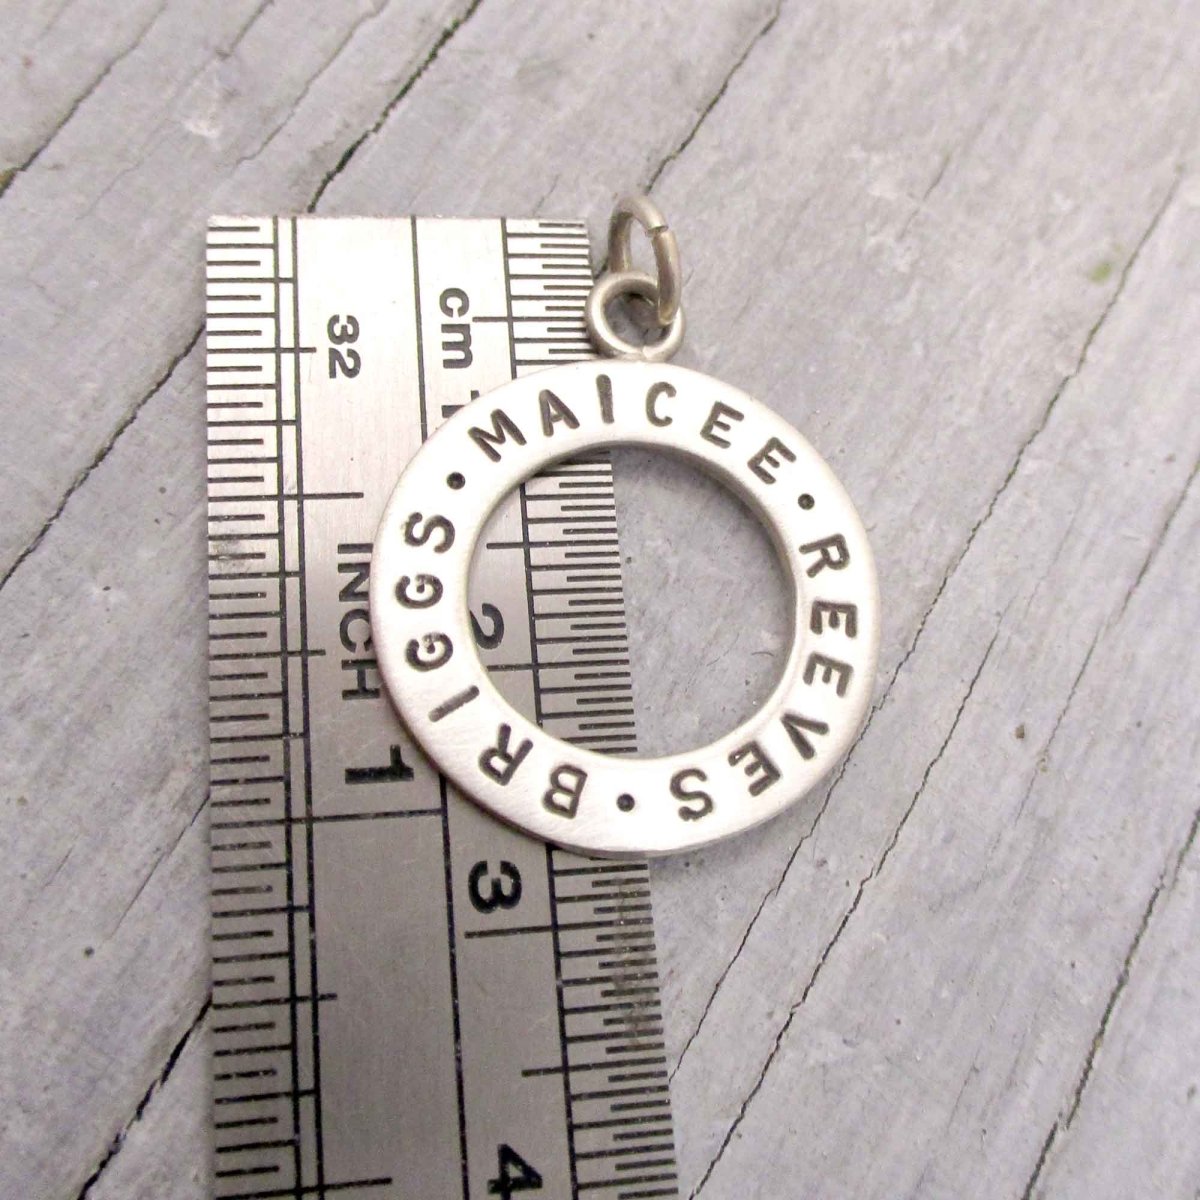 Sterling Silver Customizable Open Circle Charm - Luxe Design Jewellery